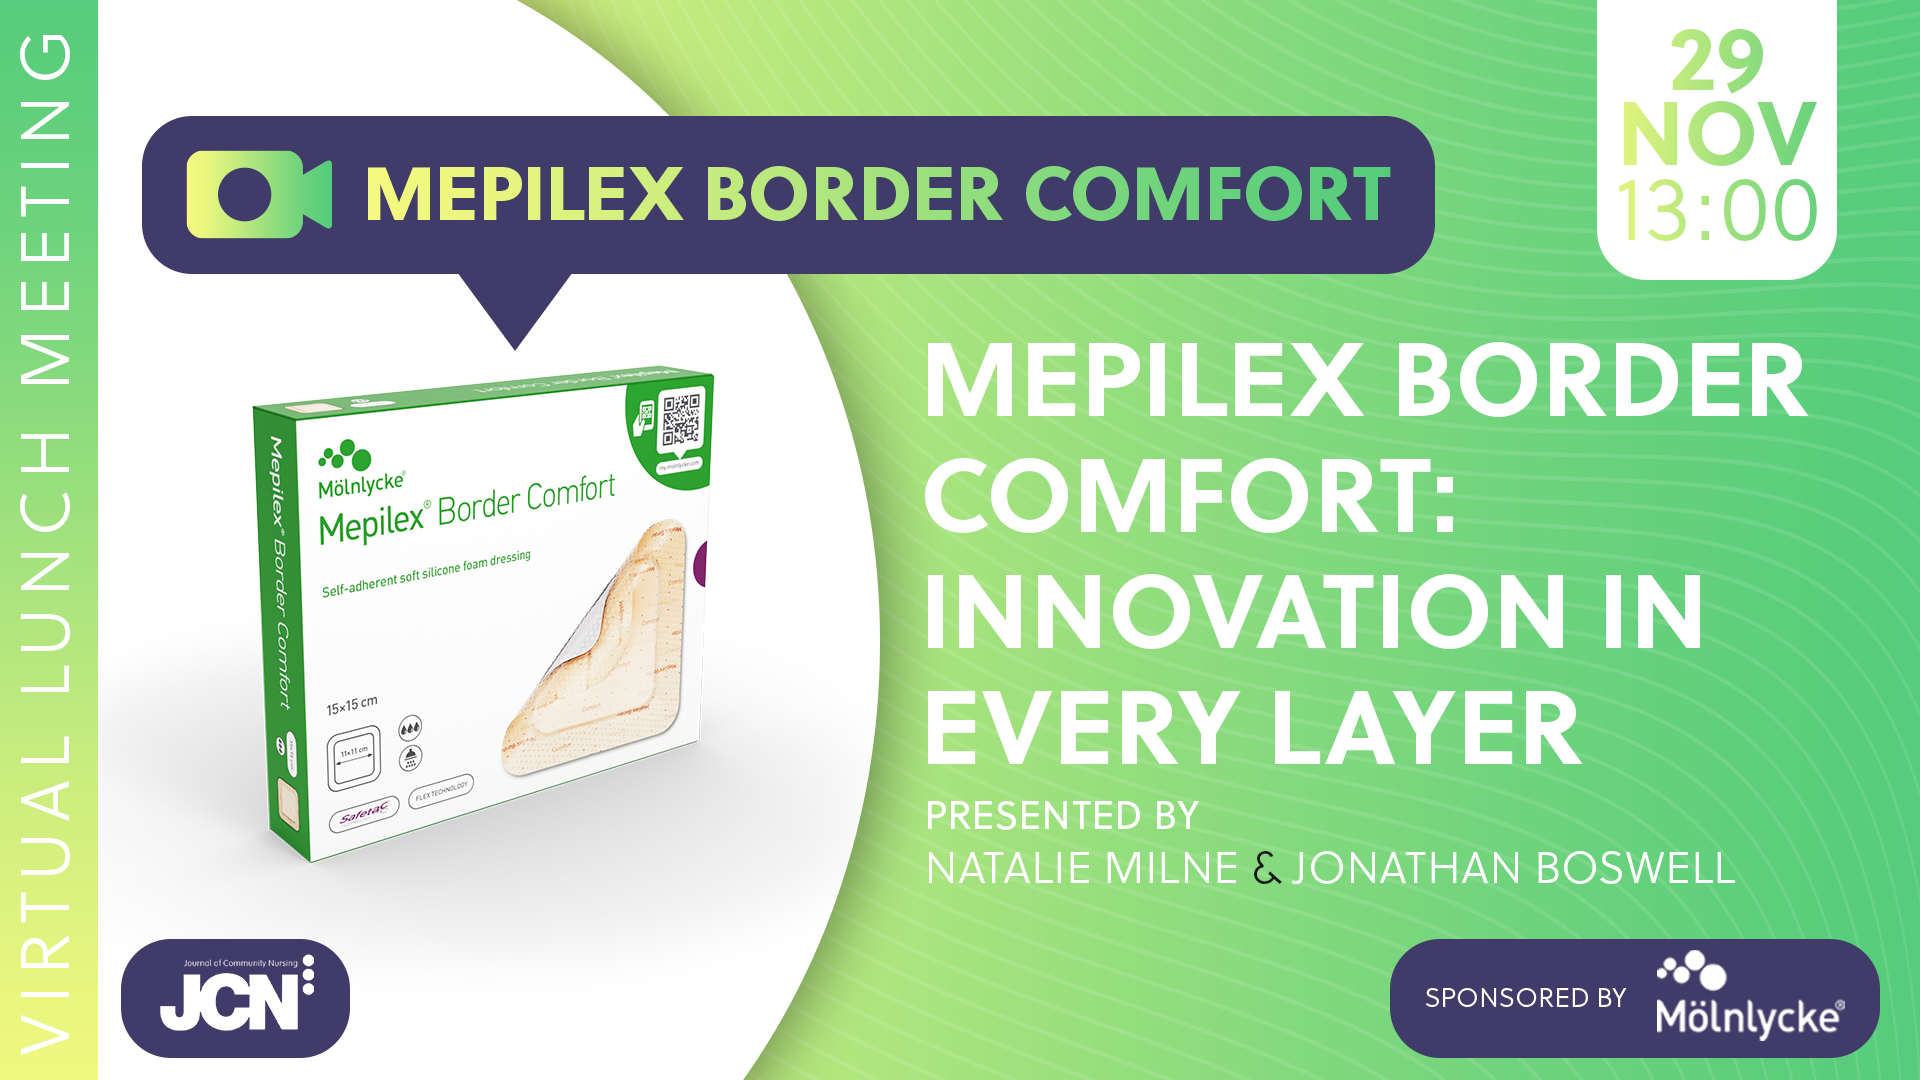 Virtual Lunch Meeting - Mepilex Border Comfort: Innovation in every layer